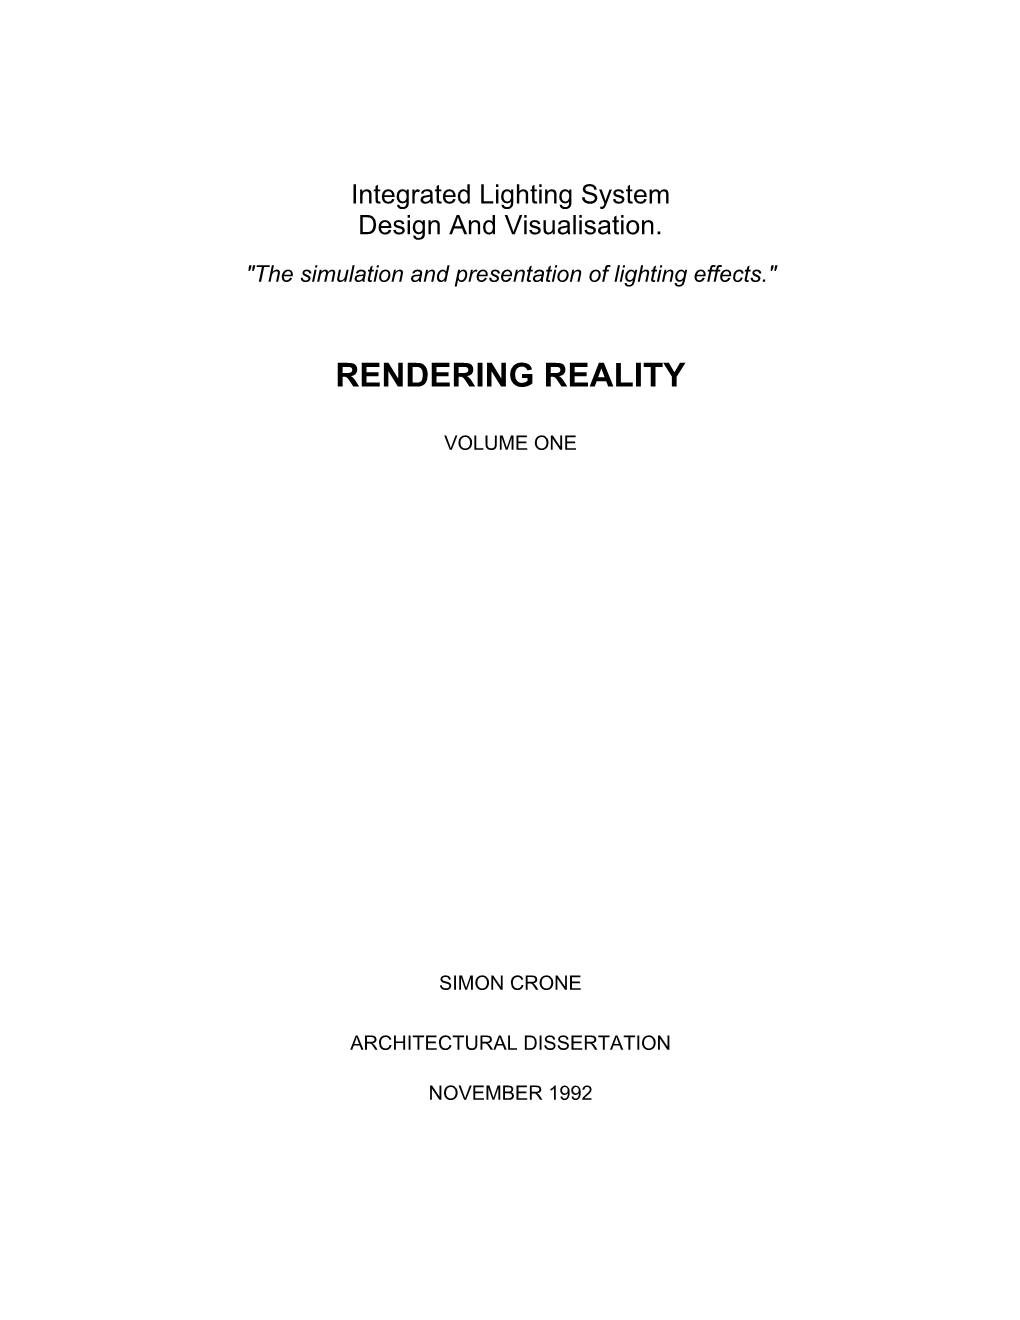 Rendering Reality